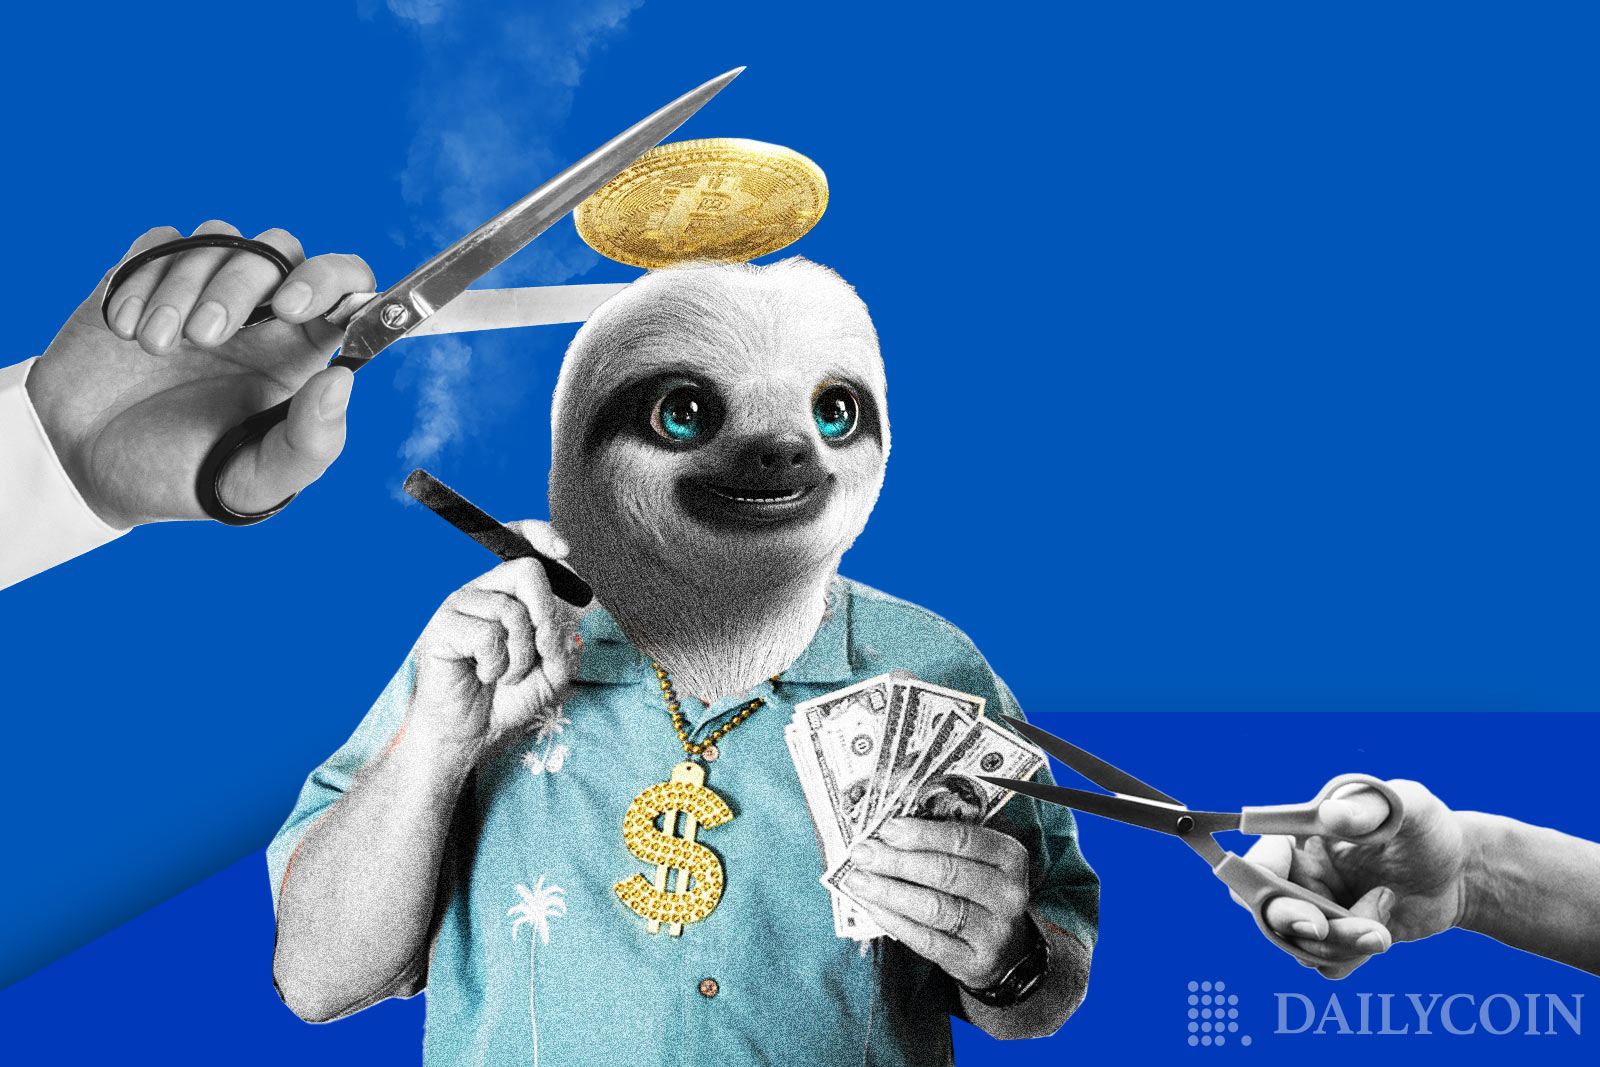 Sloth holding money is getting a haircut.